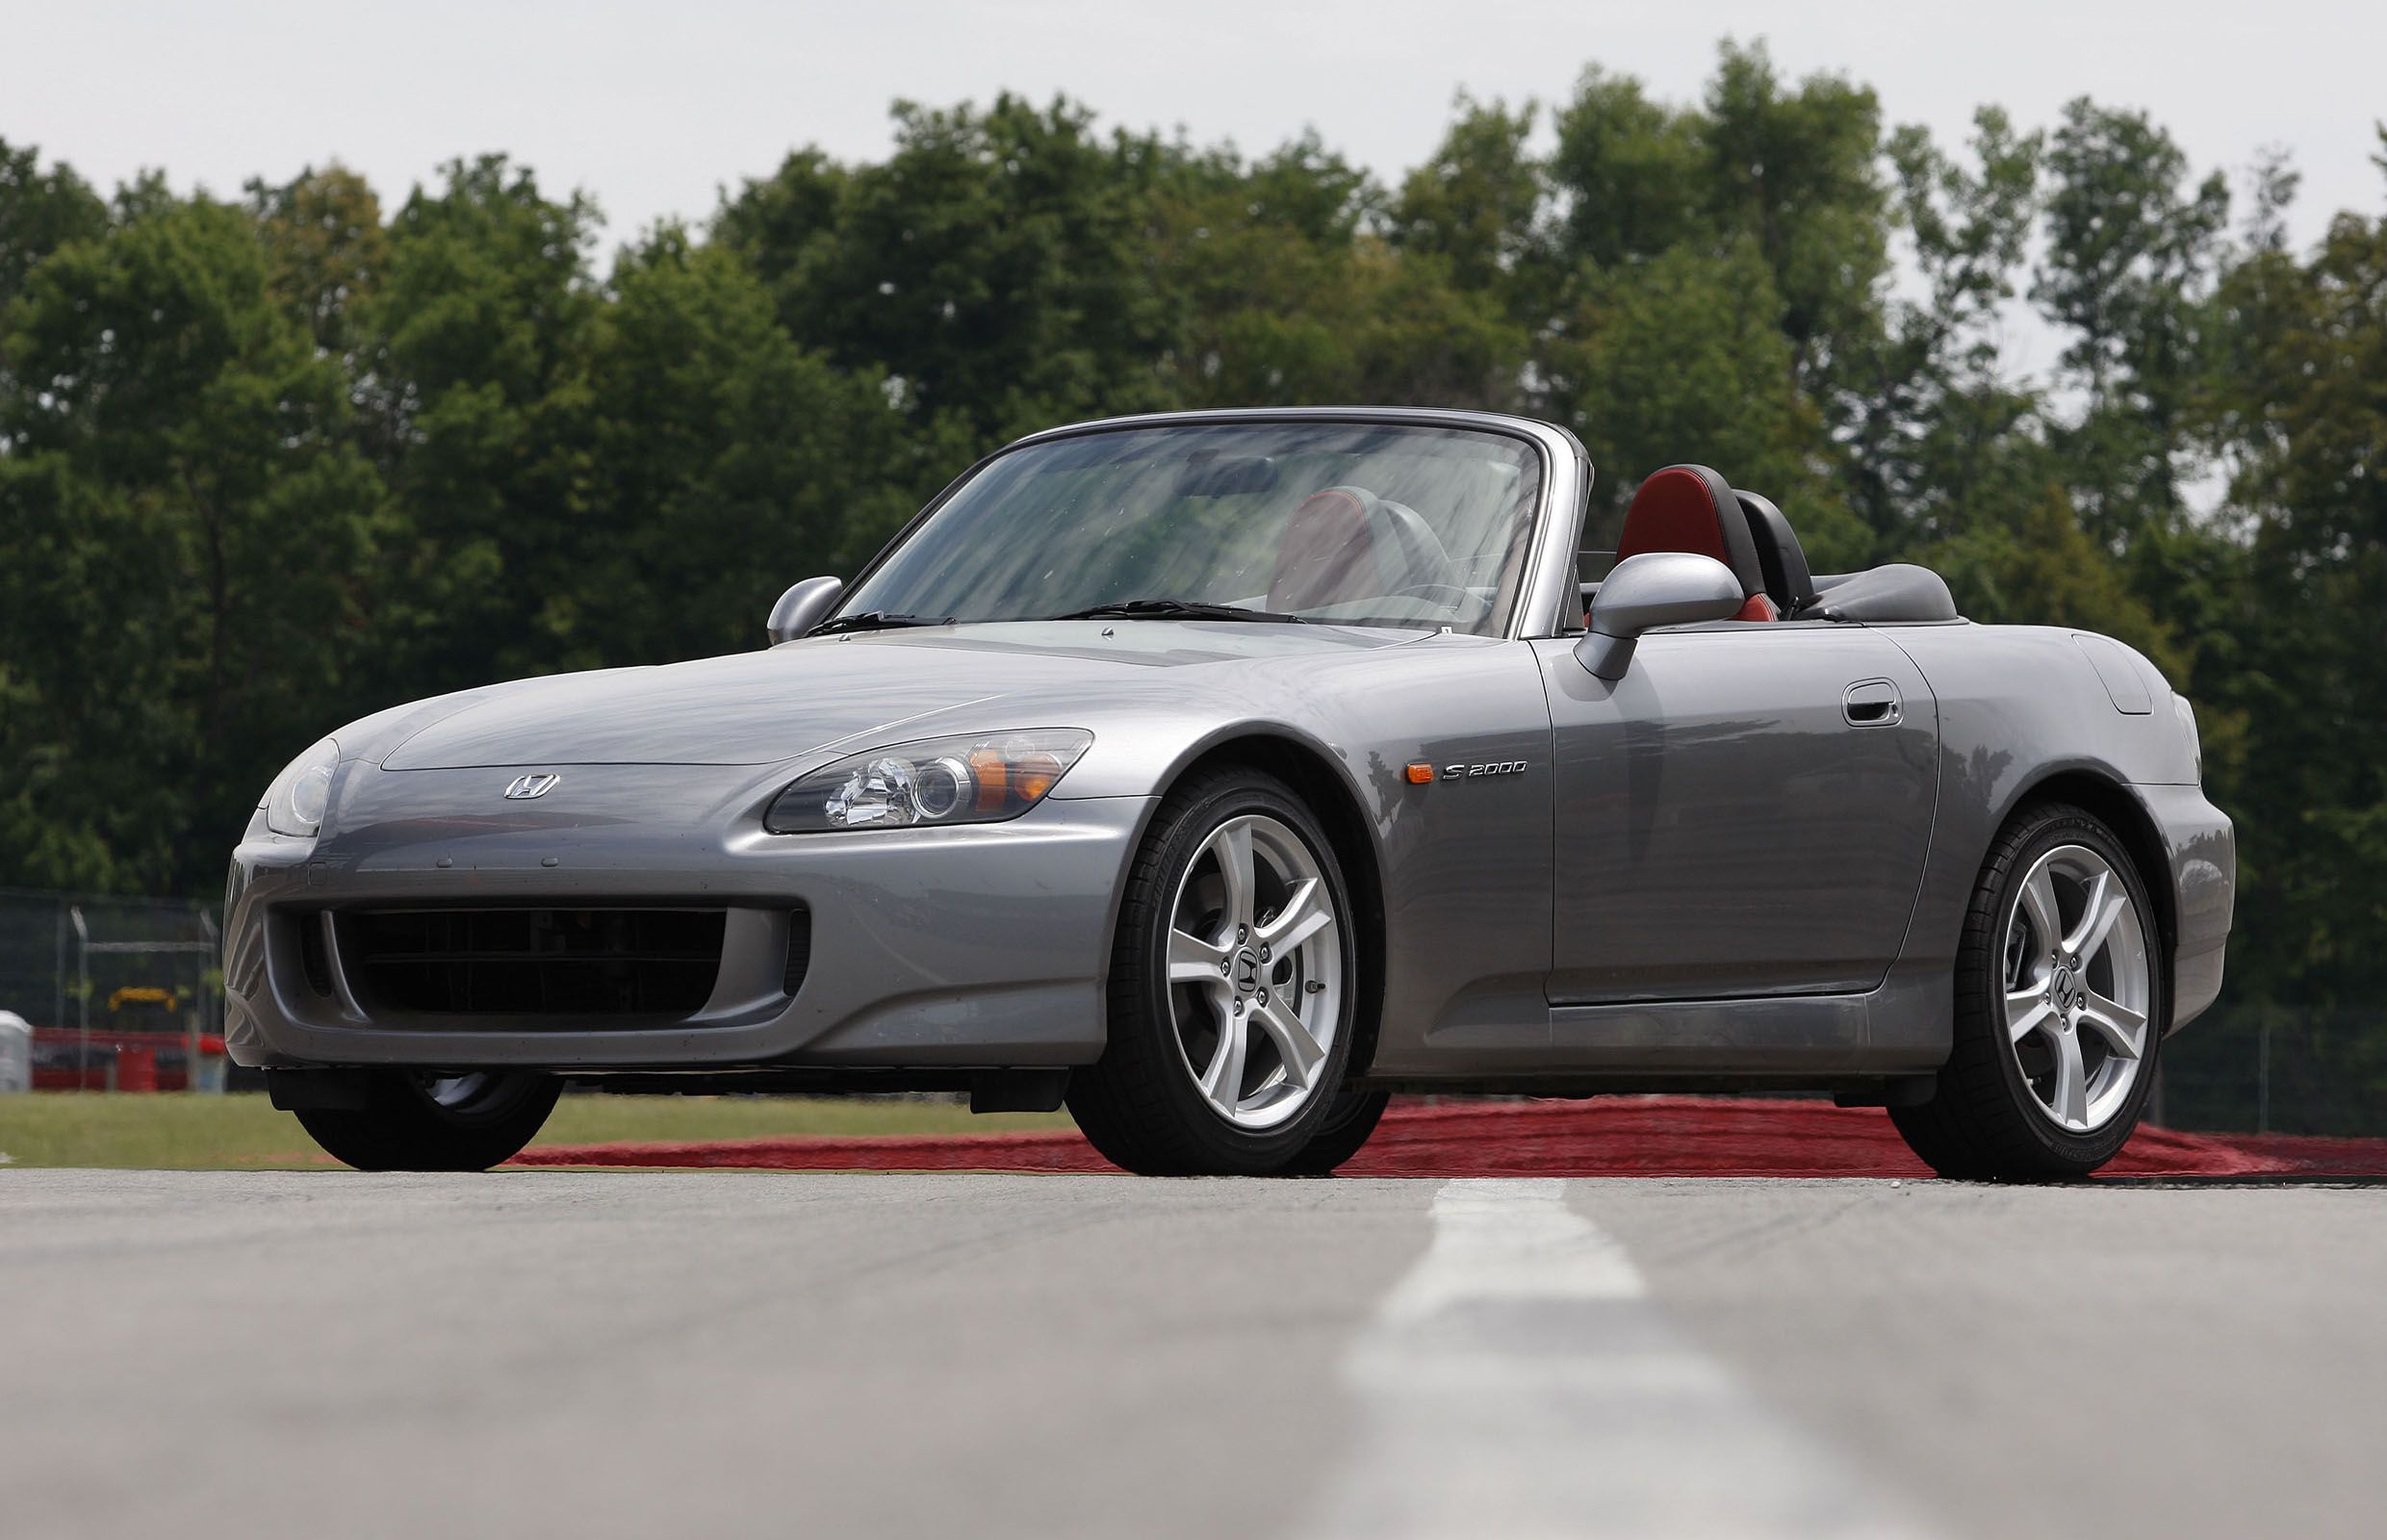 The Next Generation Honda S2000 Will Be A Mid-Engined Hybrid Coupe, News